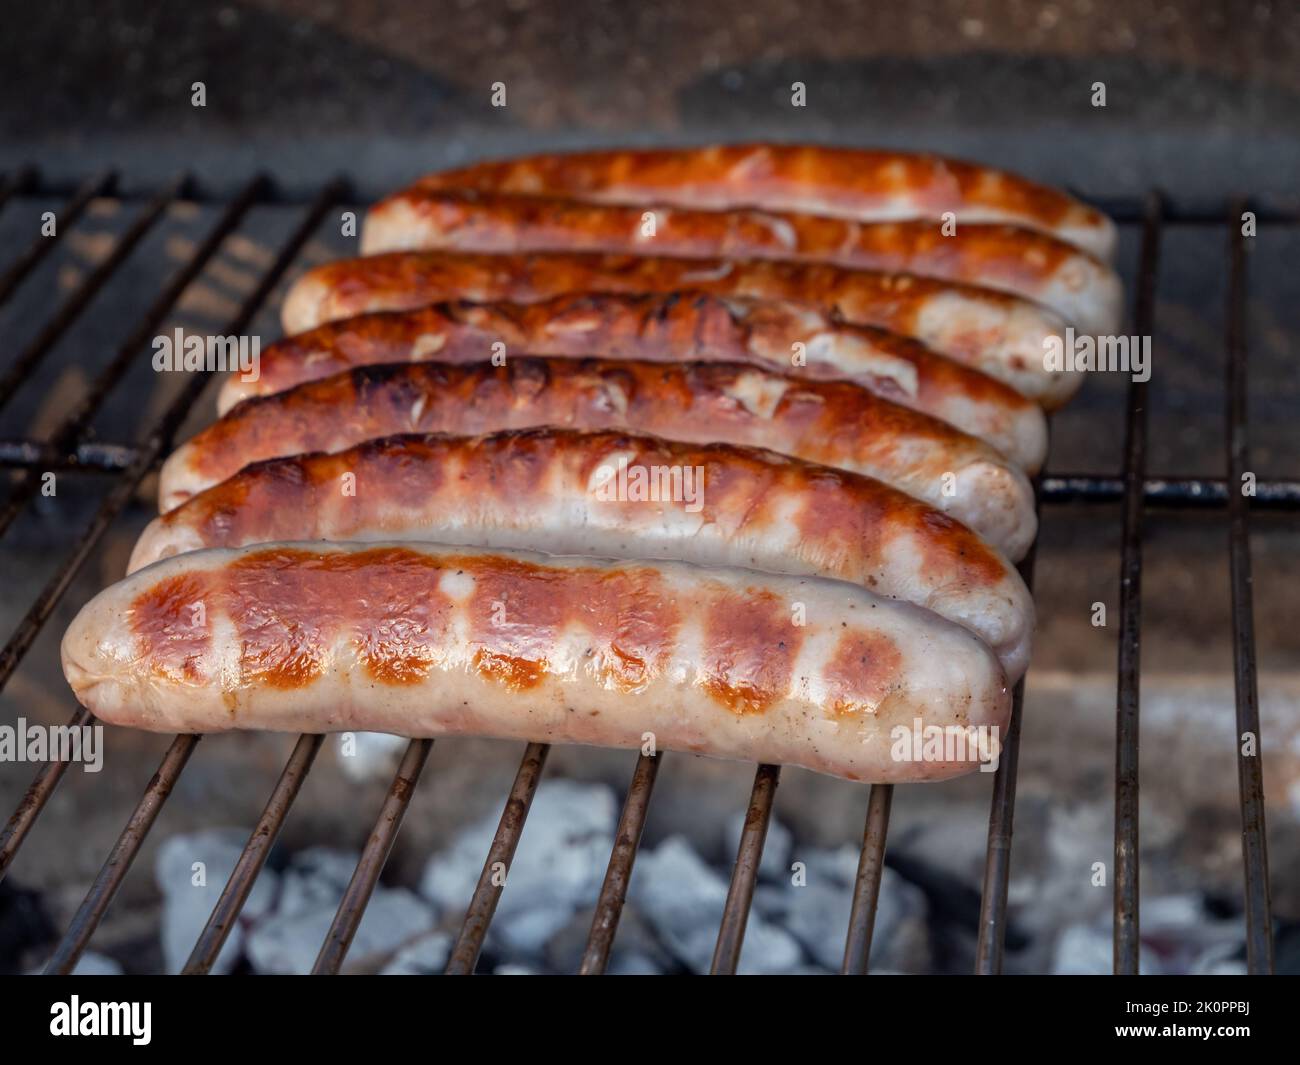 Bratwurst on a charcoal grill Stock Photo